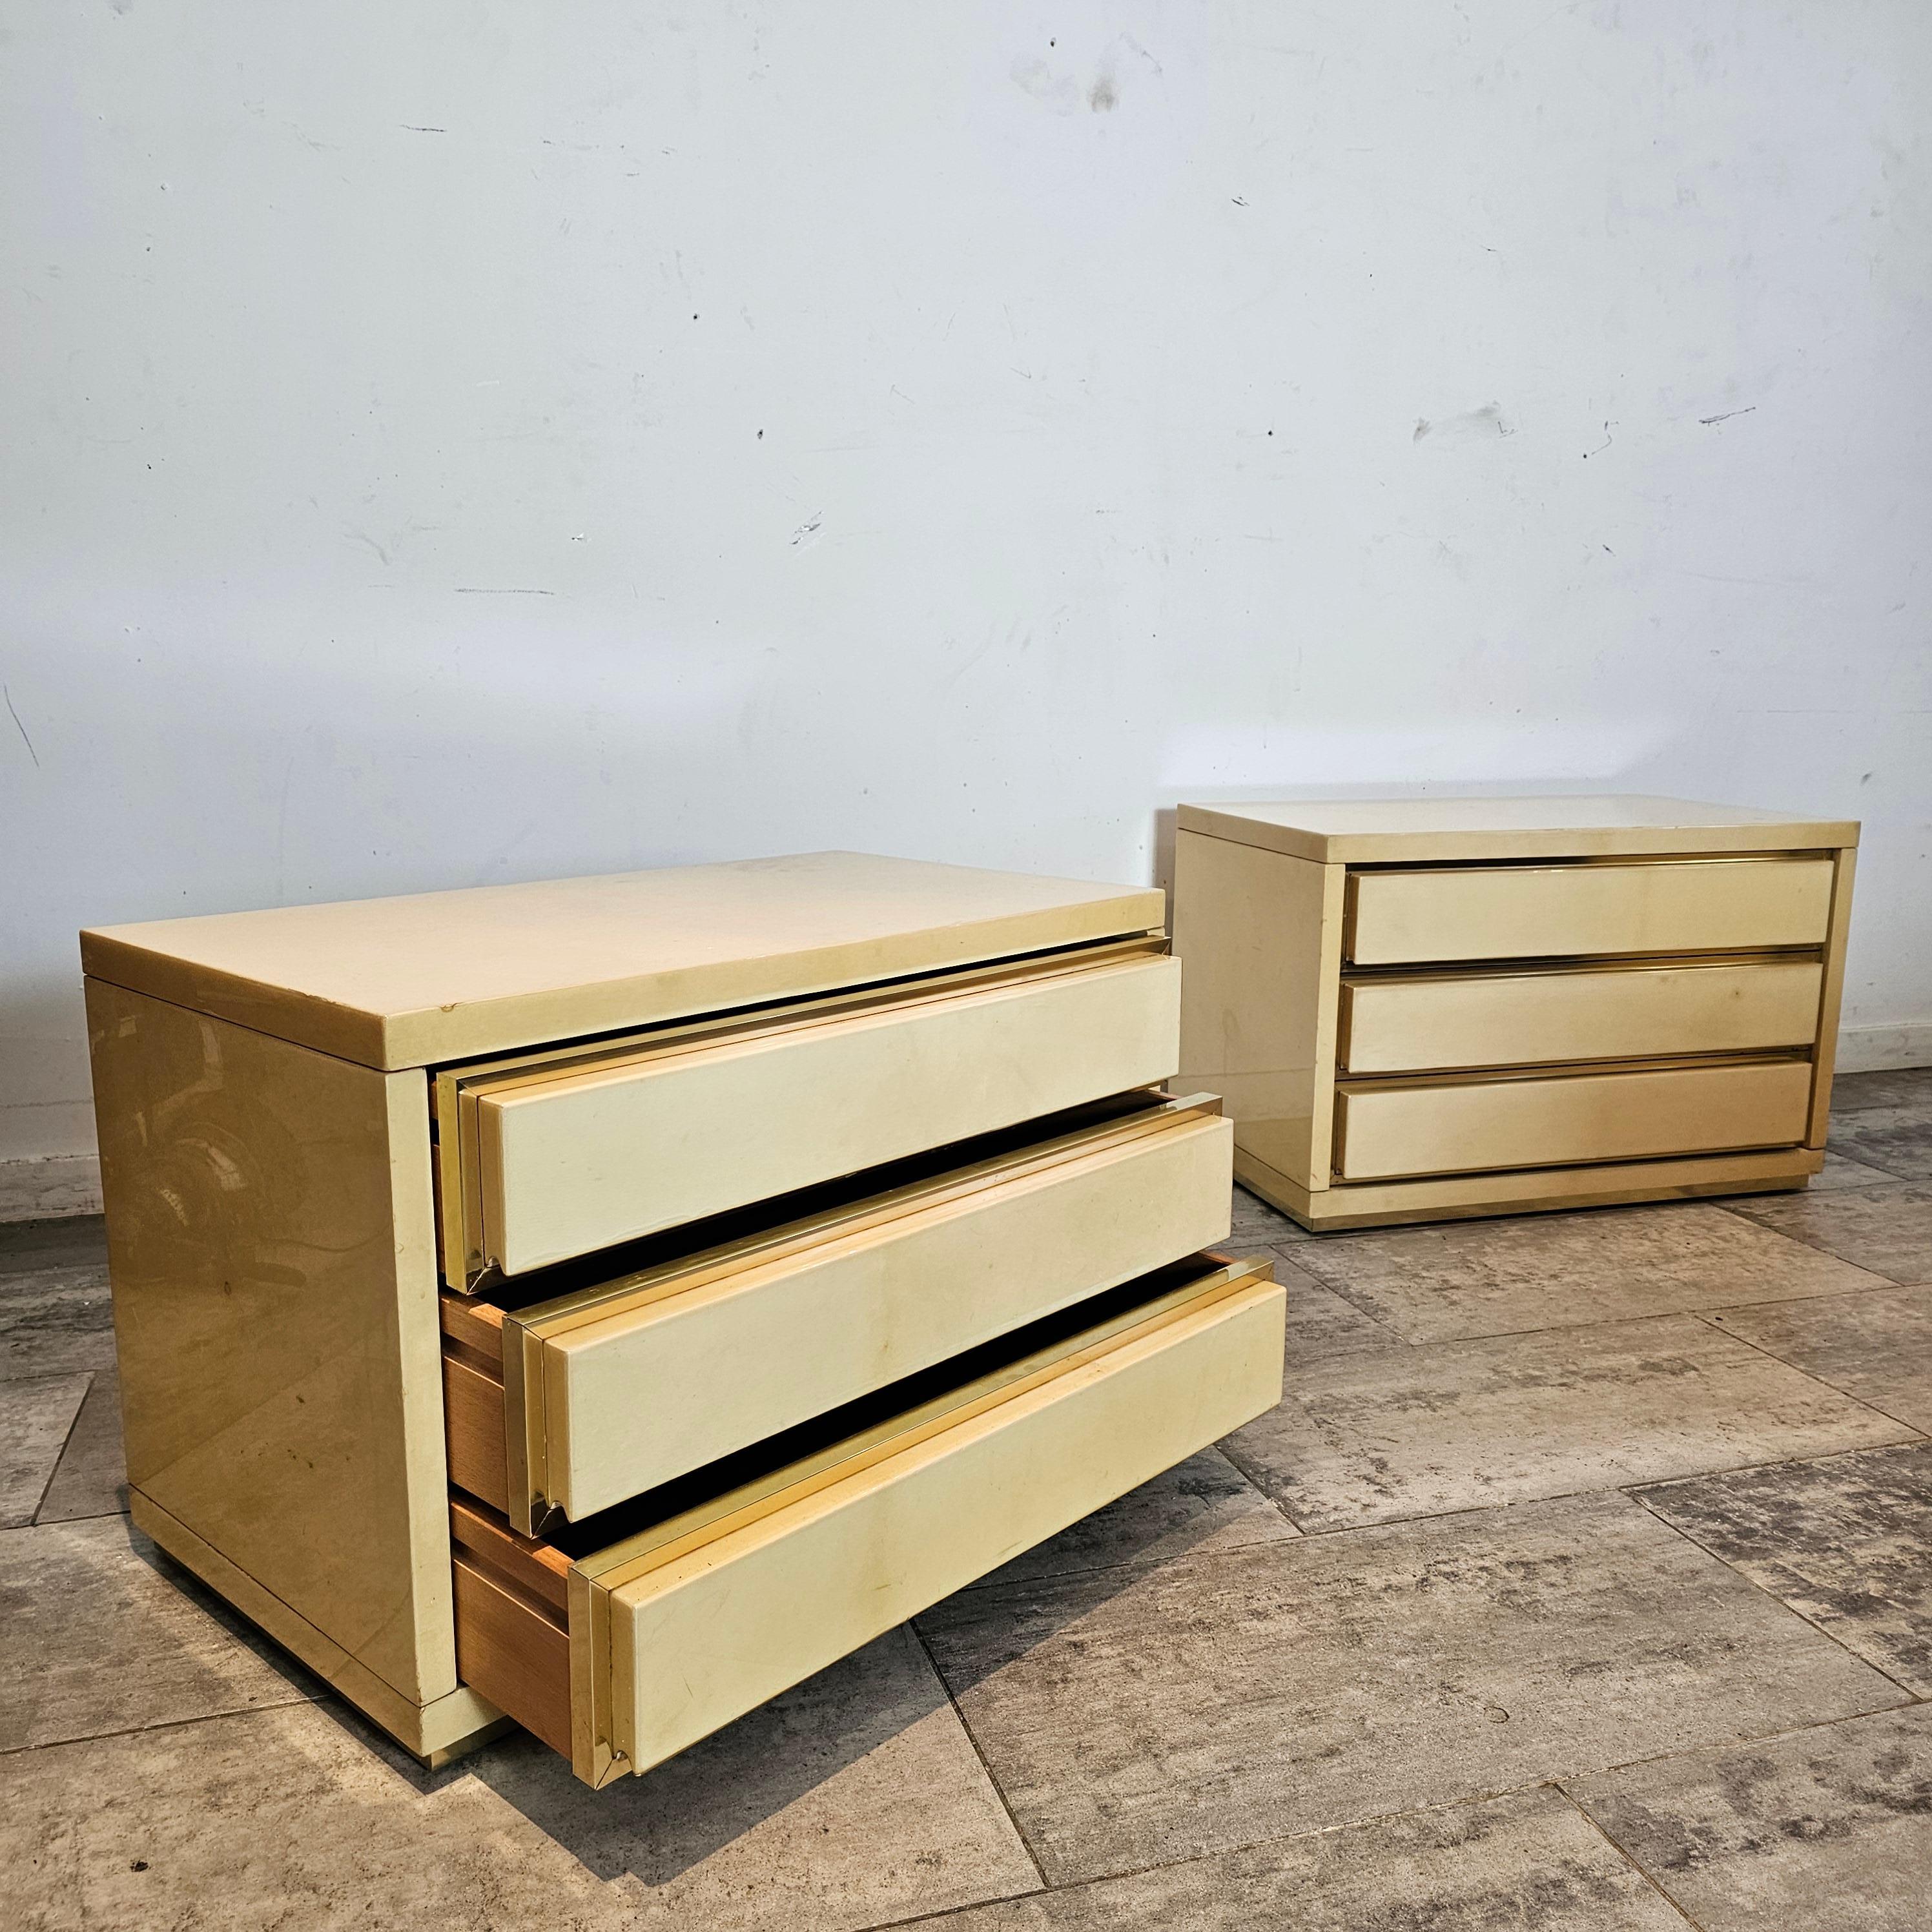 Parchment Paper Pair of Bedsides in Ivory Color, from Aldo Tura, Italy 1970s For Sale